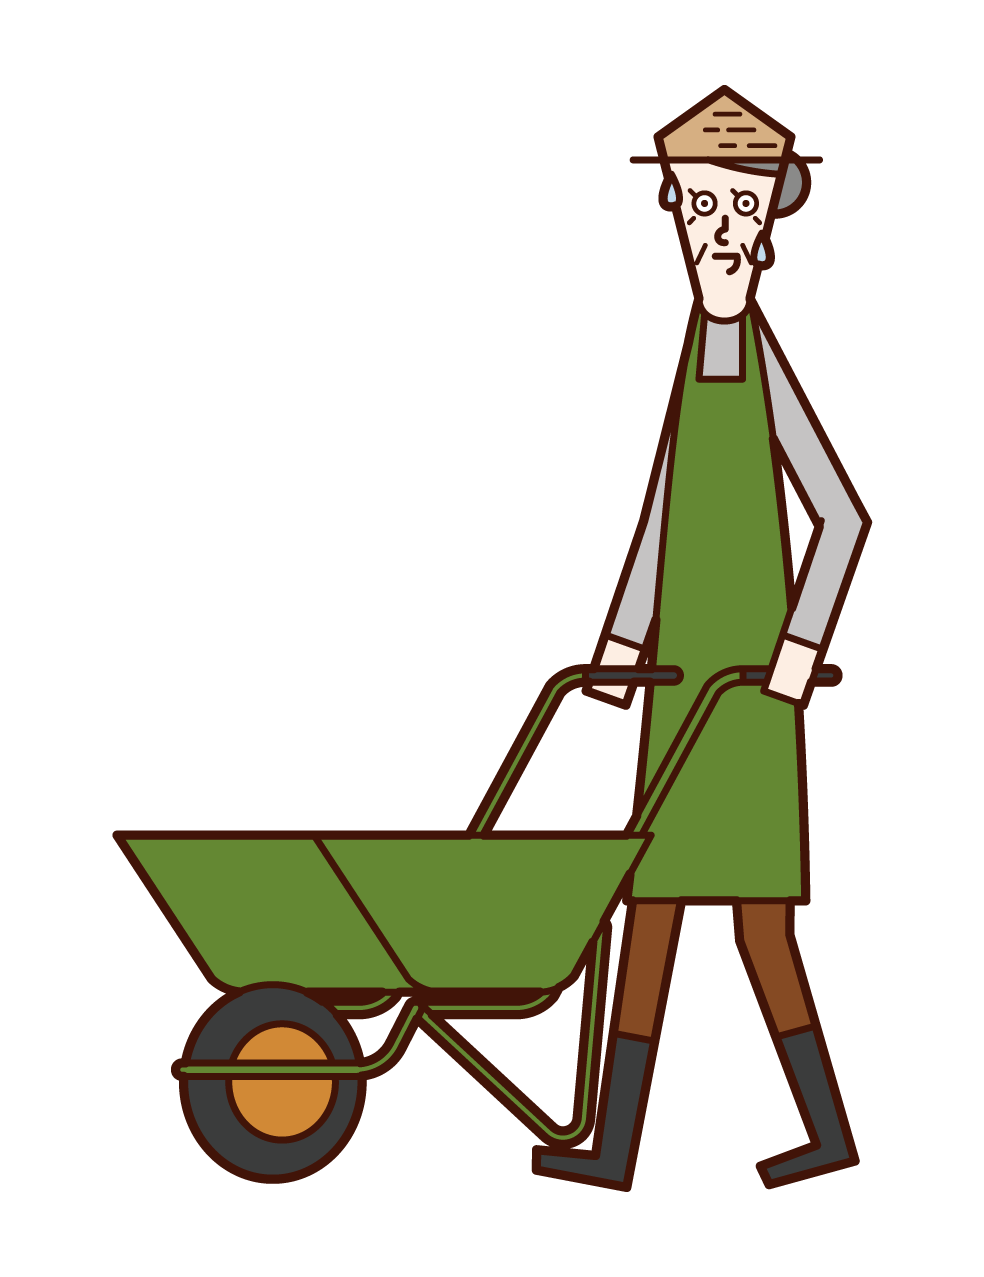 Illustration of an old man (grandmother) using a wheeled unicycle